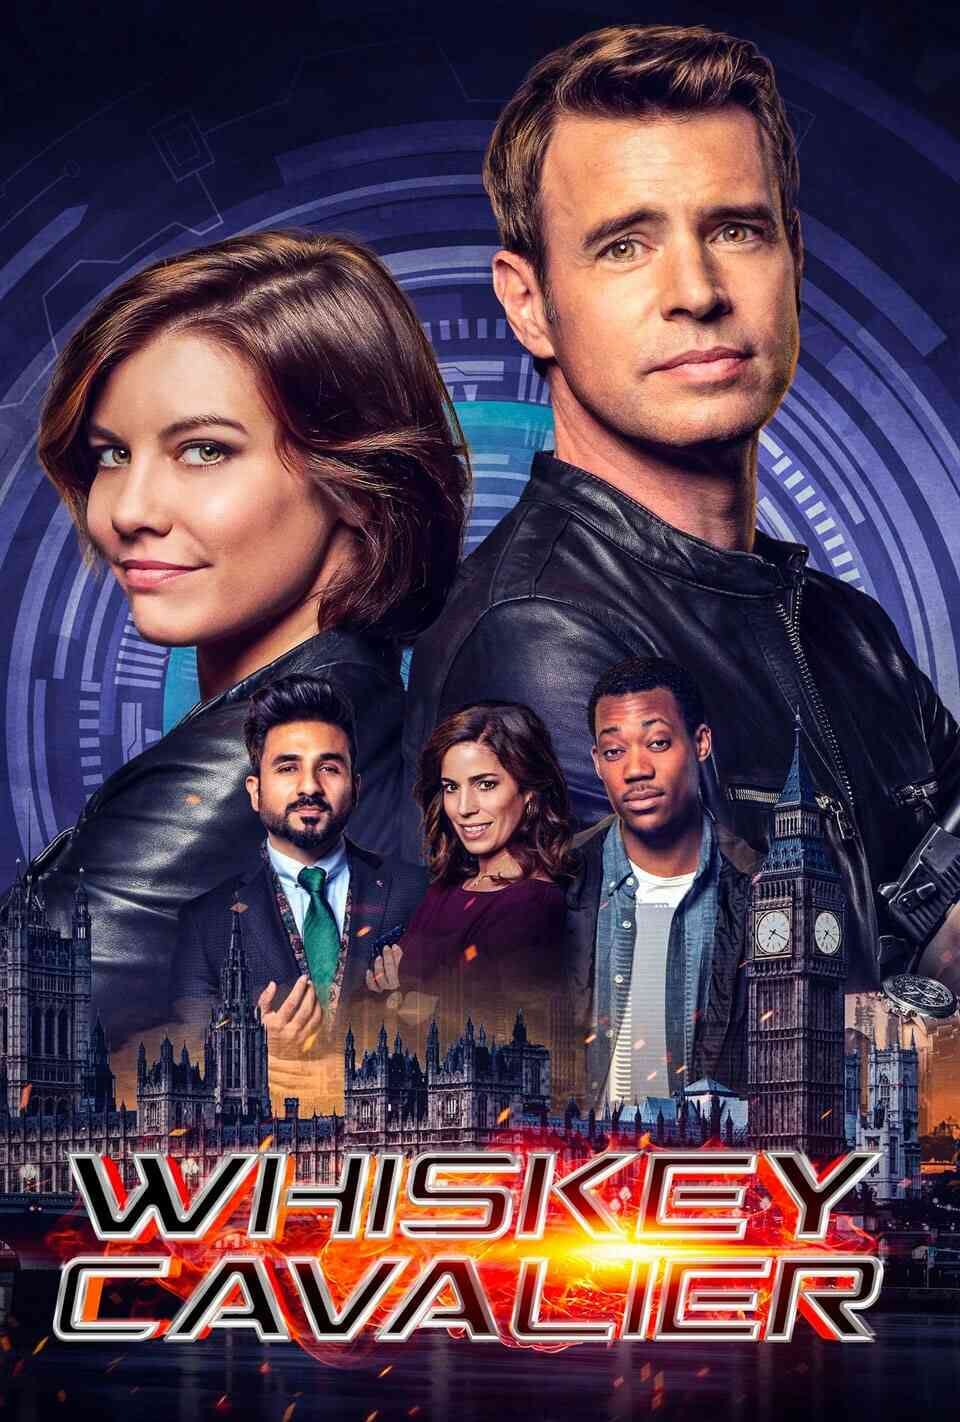 Read Whiskey Cavalier screenplay (poster)